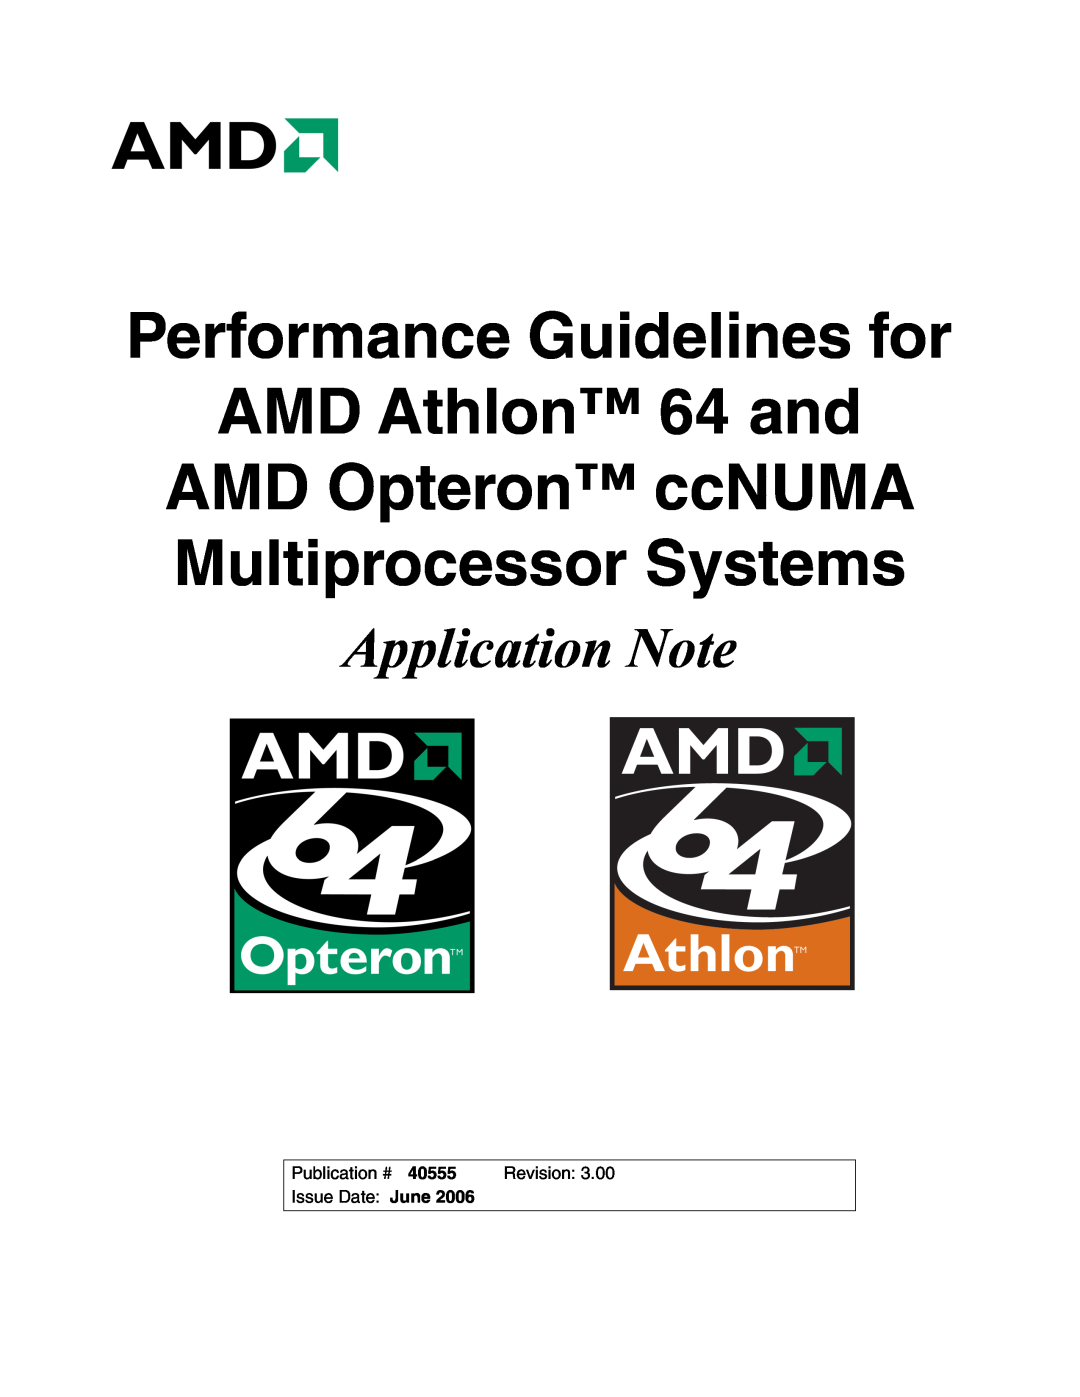 AMD specifications Refer to the AMD Functional Data Sheet, AMD Turion 64 Mobile Technology Product Data Sheet 